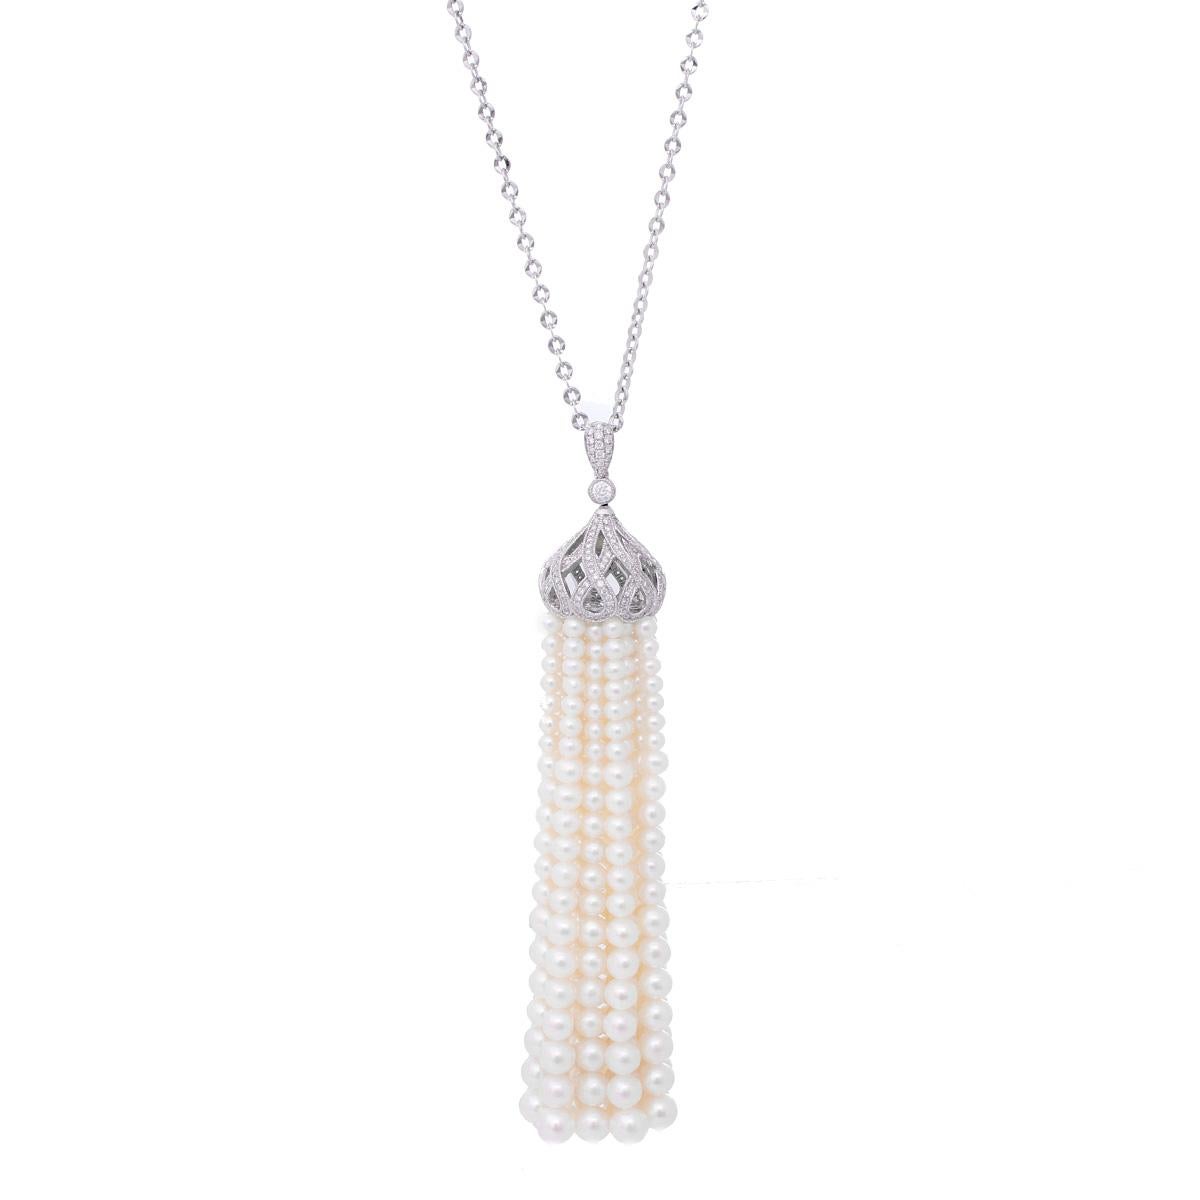 Women's or Men's Diamond White Gold and Pearl Tassel Necklace